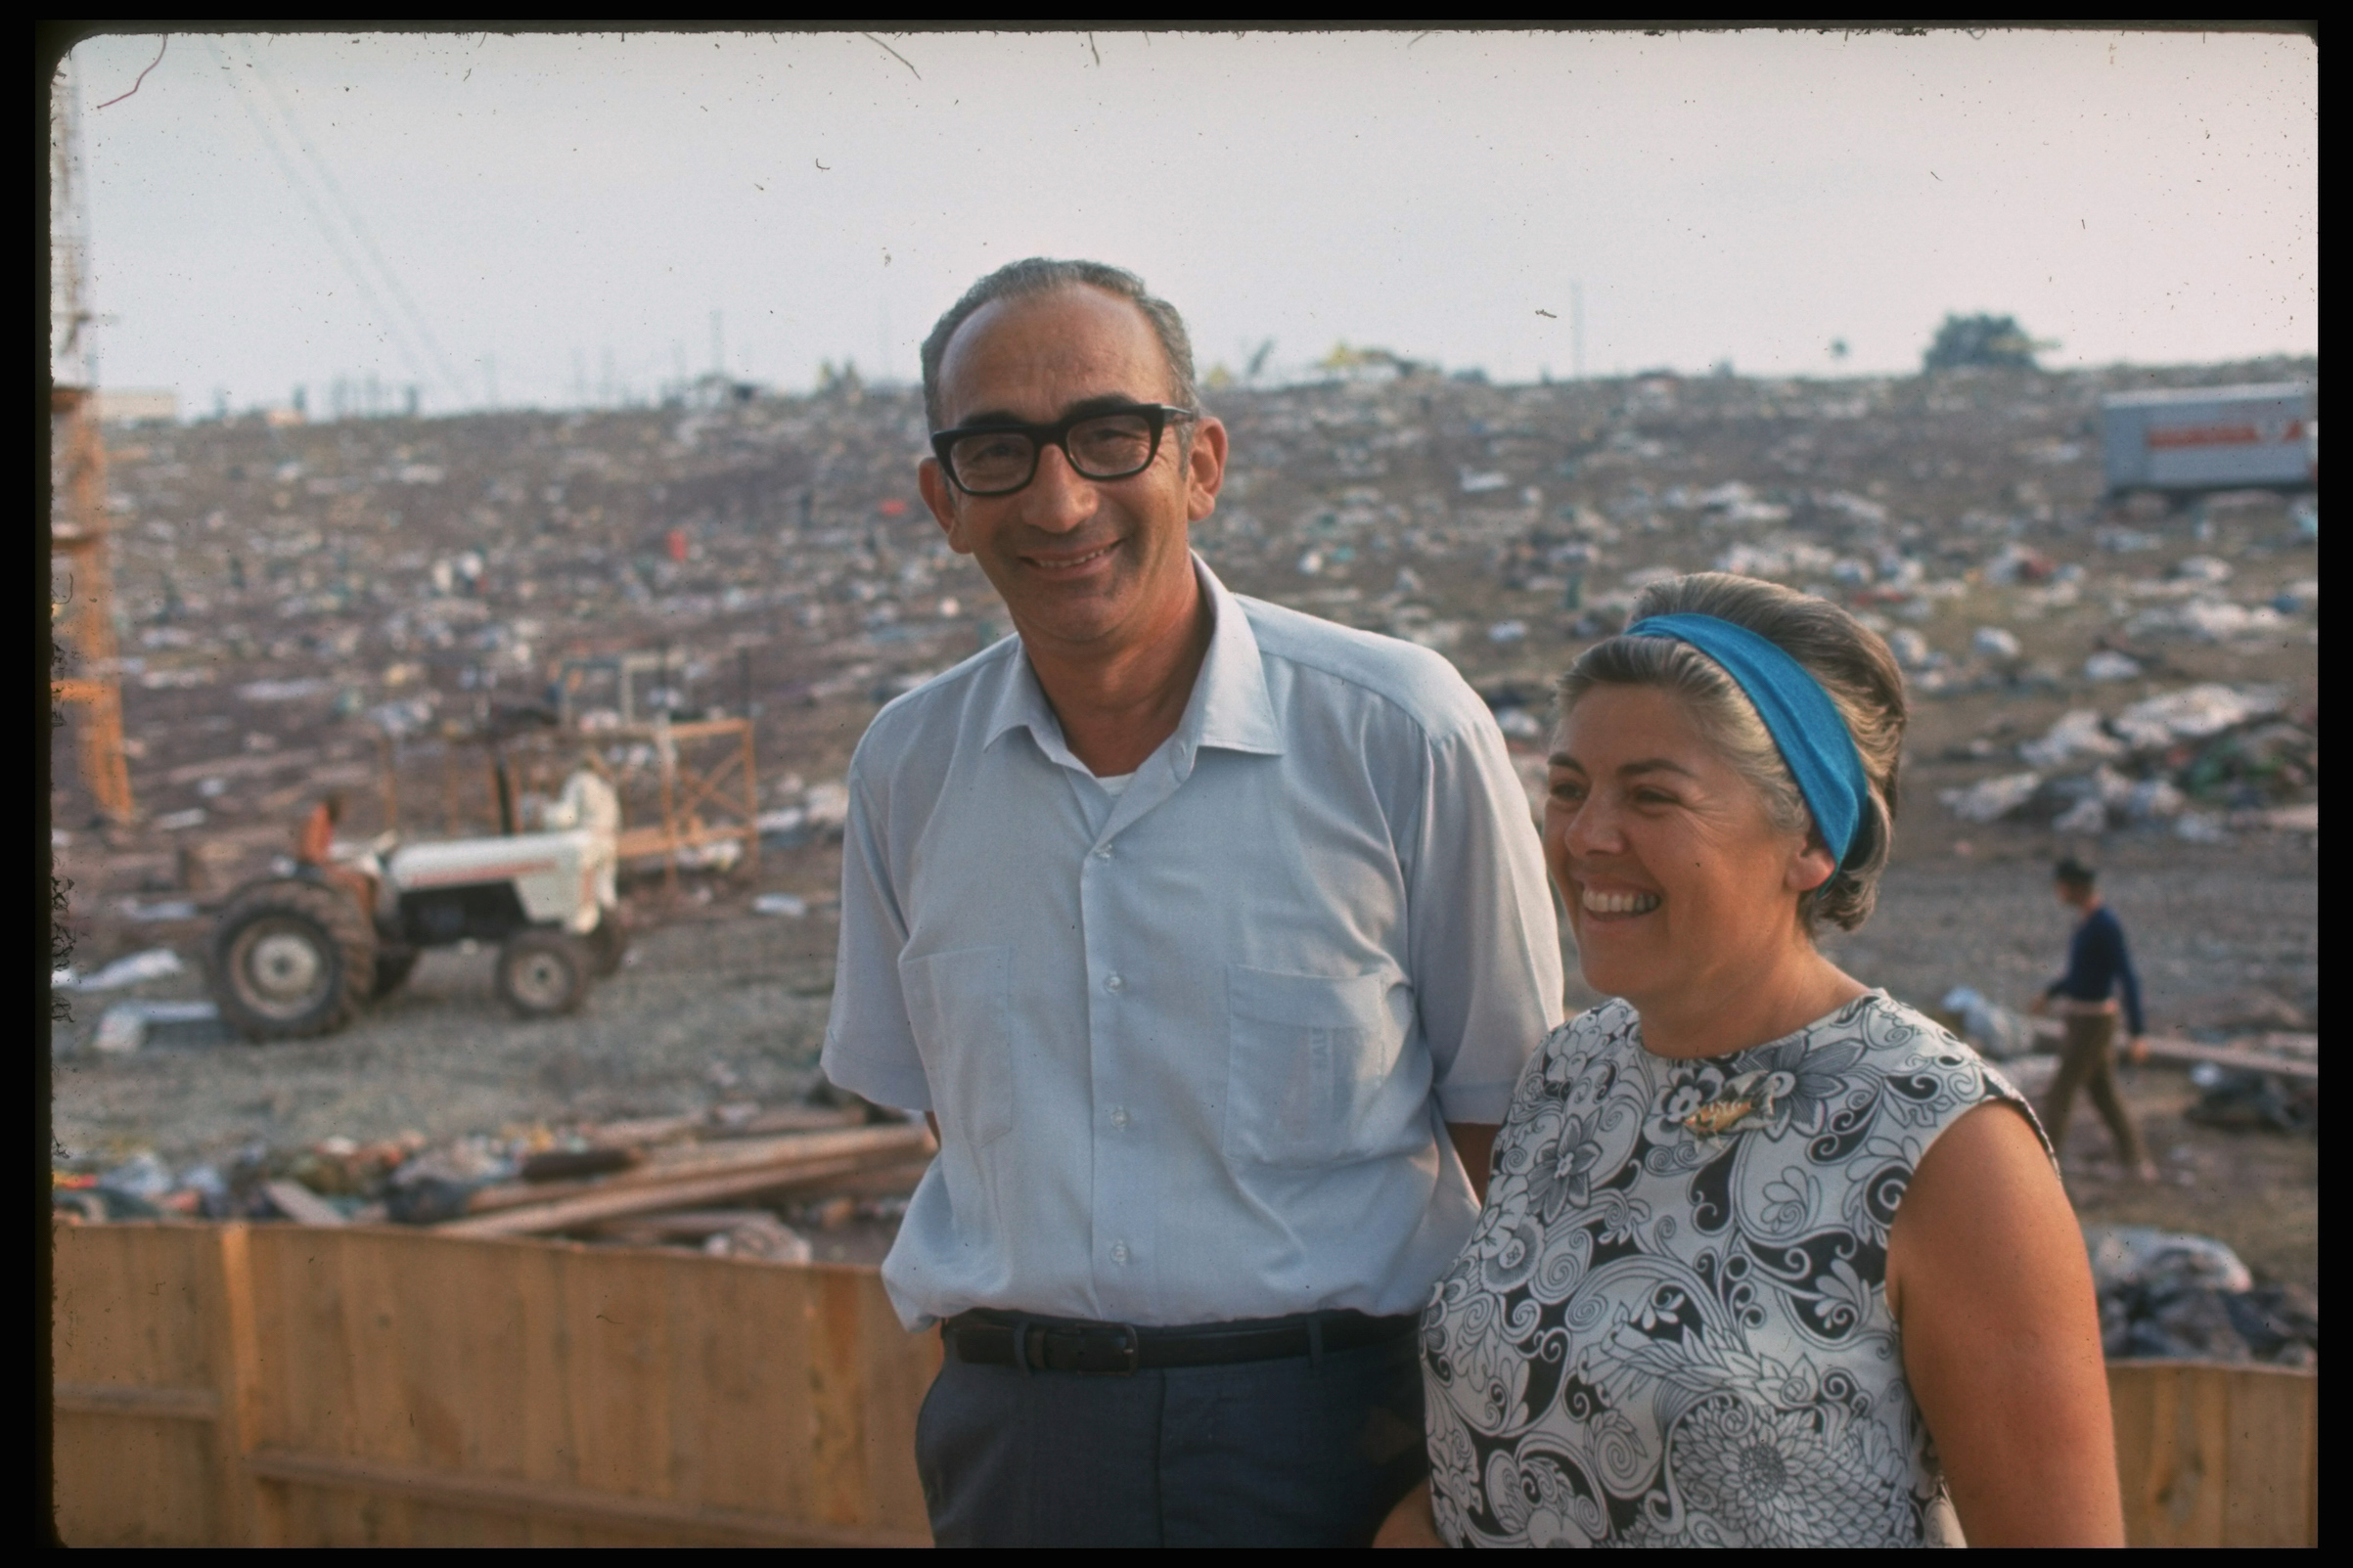 Max and Miriam Yasgur on their land after the Woodstock Music & Art Fair. (Bill Eppridge—The LIFE Picture Collection via Getty Images)